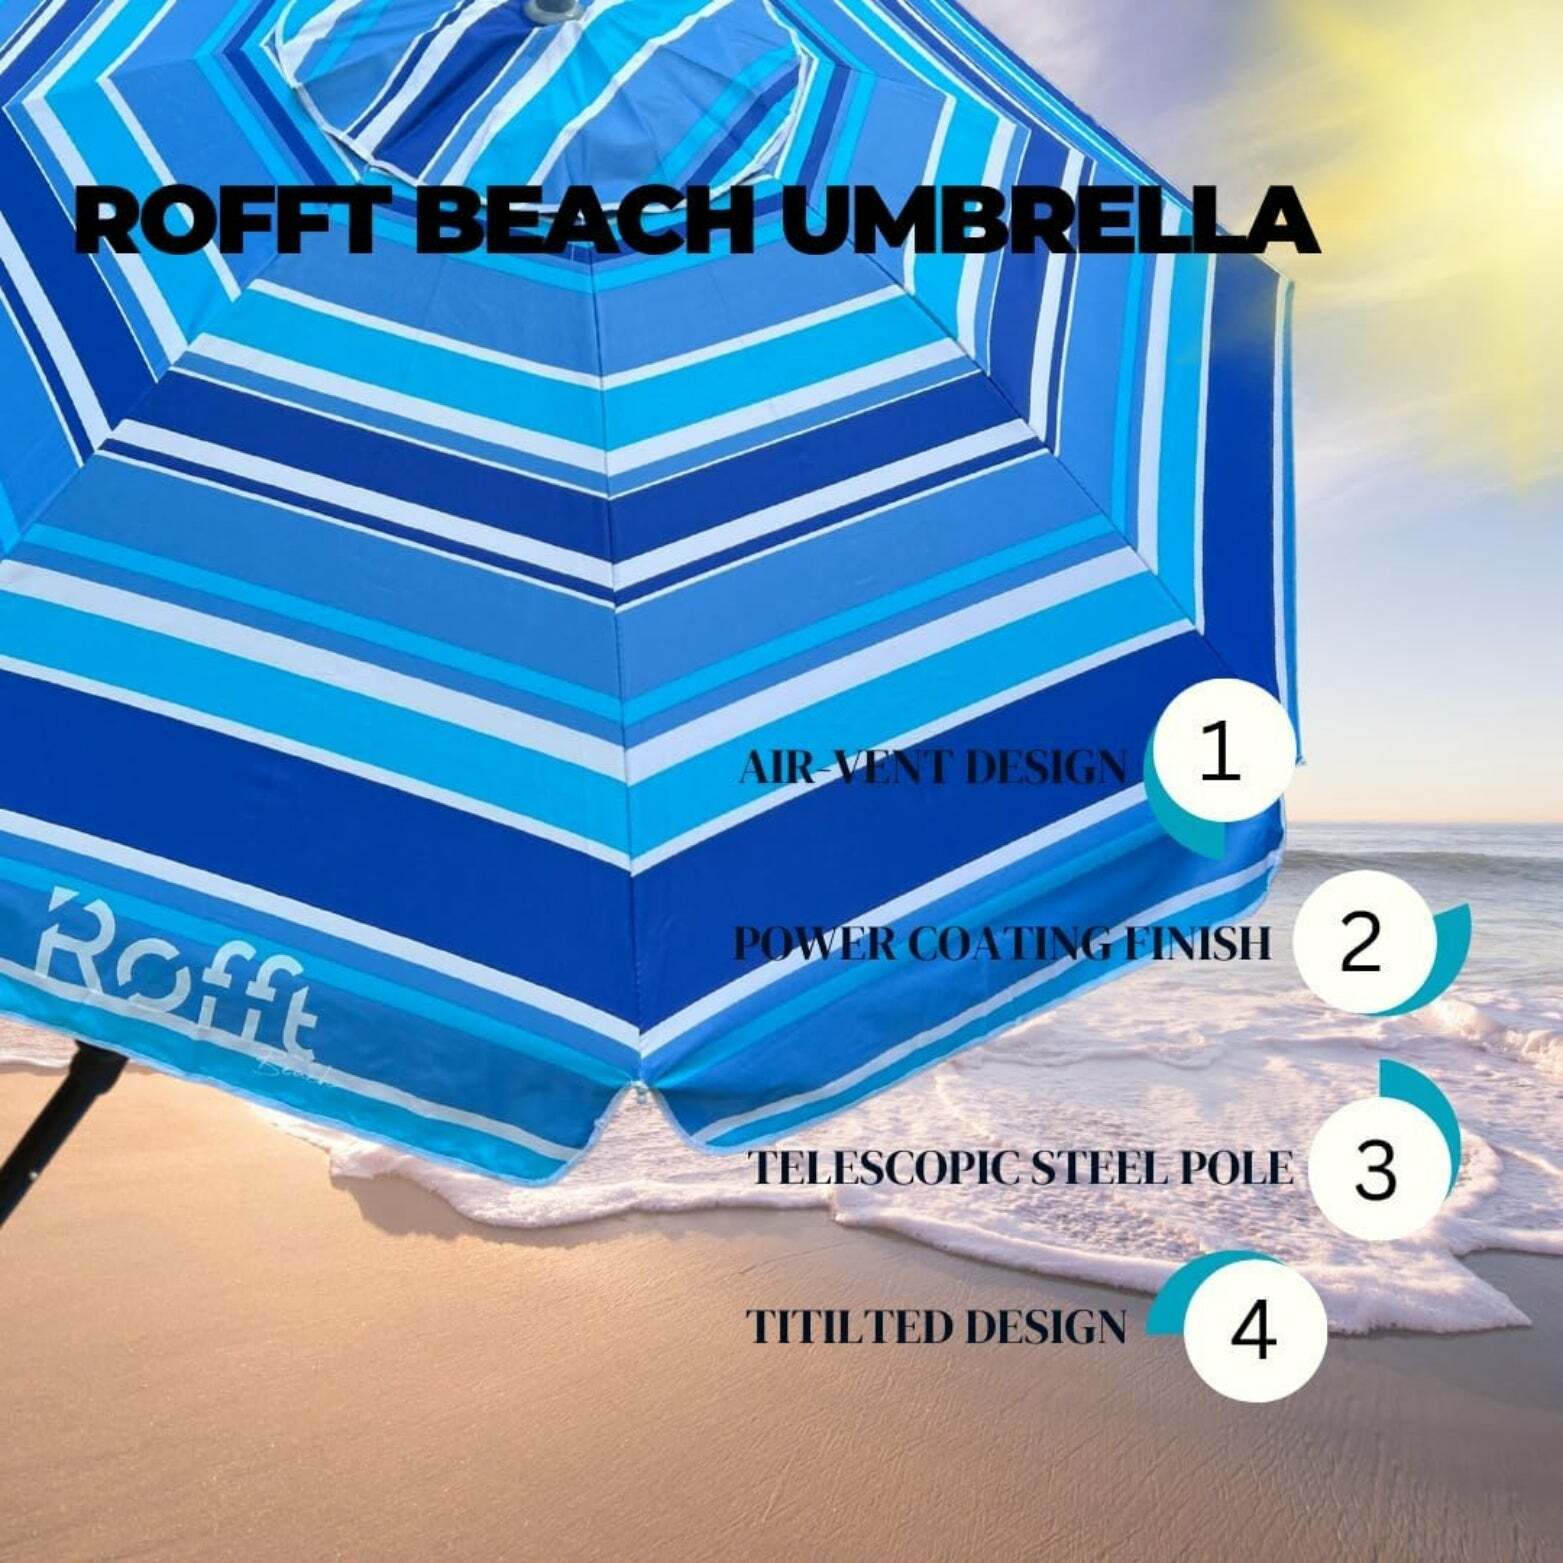 ROFFT Sturdy Beach Umbrella with UV Protection and Windproof Design - 6.5 Ft Coverage, Steel & Aluminum Pole, Tilt Adjustment- Blue Stripes